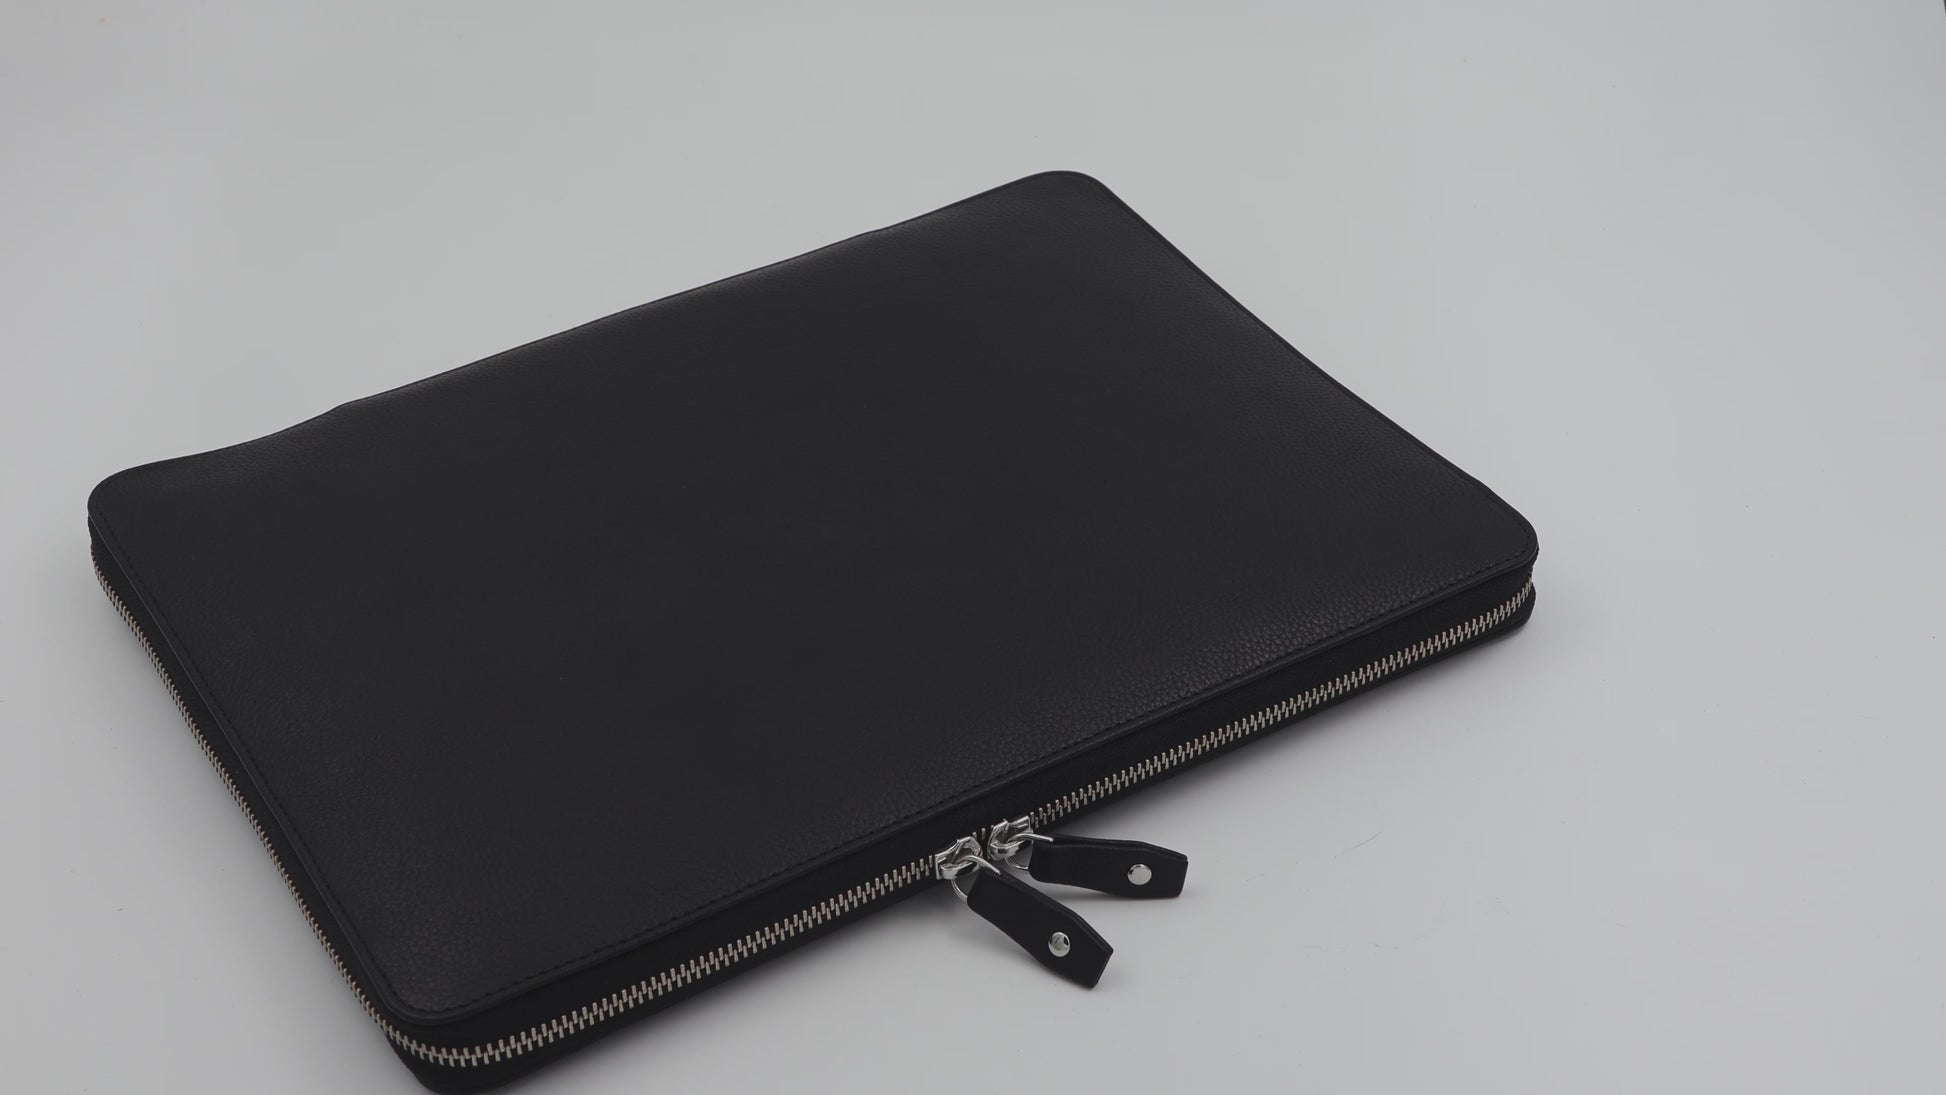 A video showing the leather laptop case in black. Fits the Surface pro 10 device